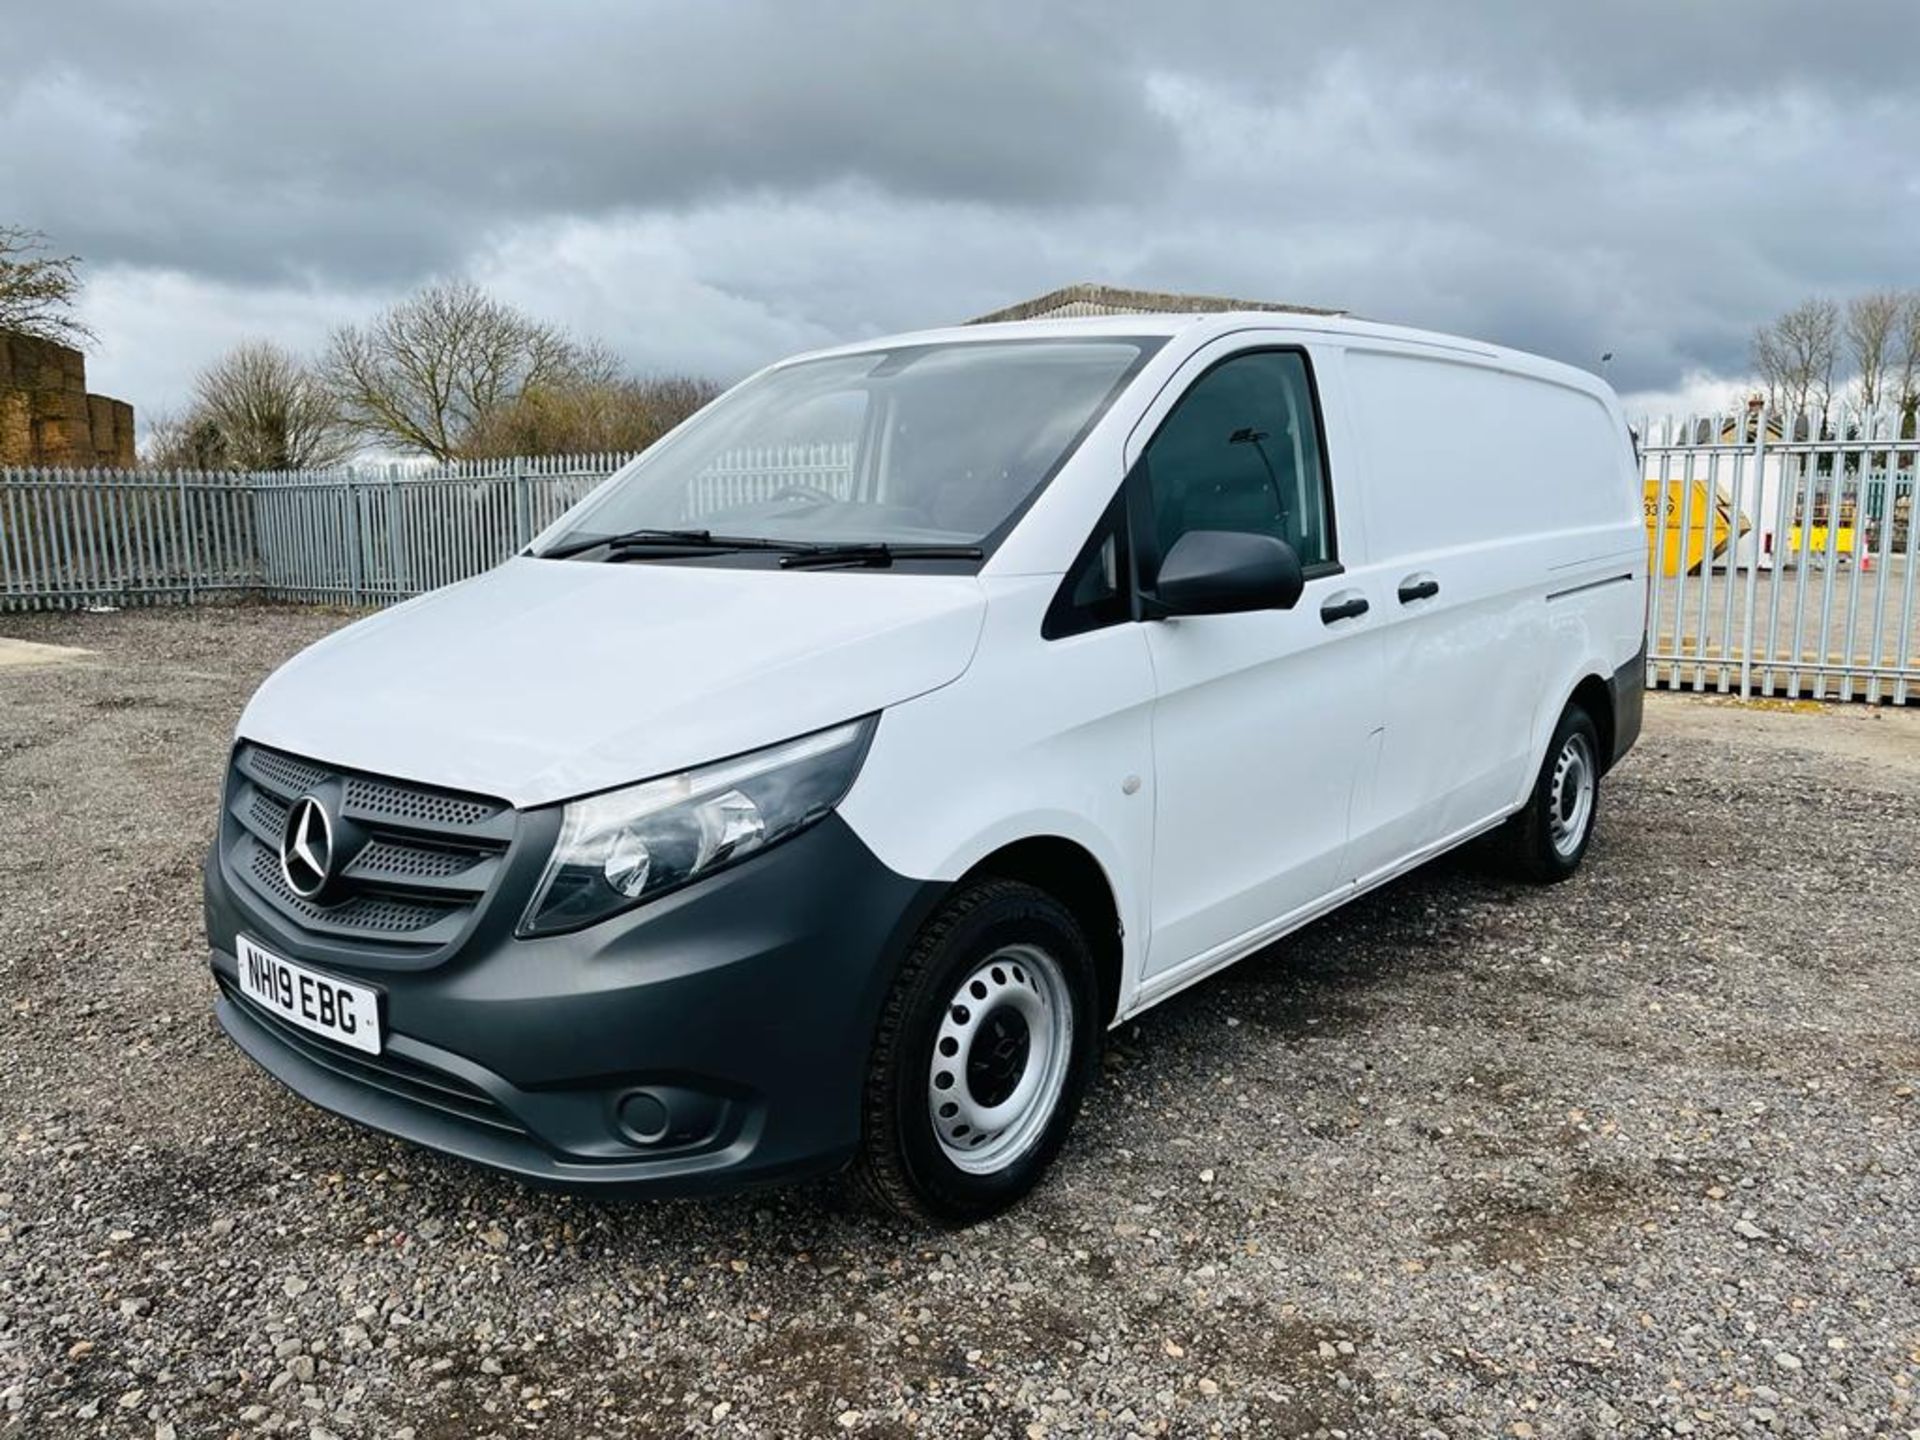 Mercedes Benz Vito 1.6 111 CDI FWD 2019 '19 Reg' - ULEZ Compliant - Only 85,733 Miles - Image 3 of 24